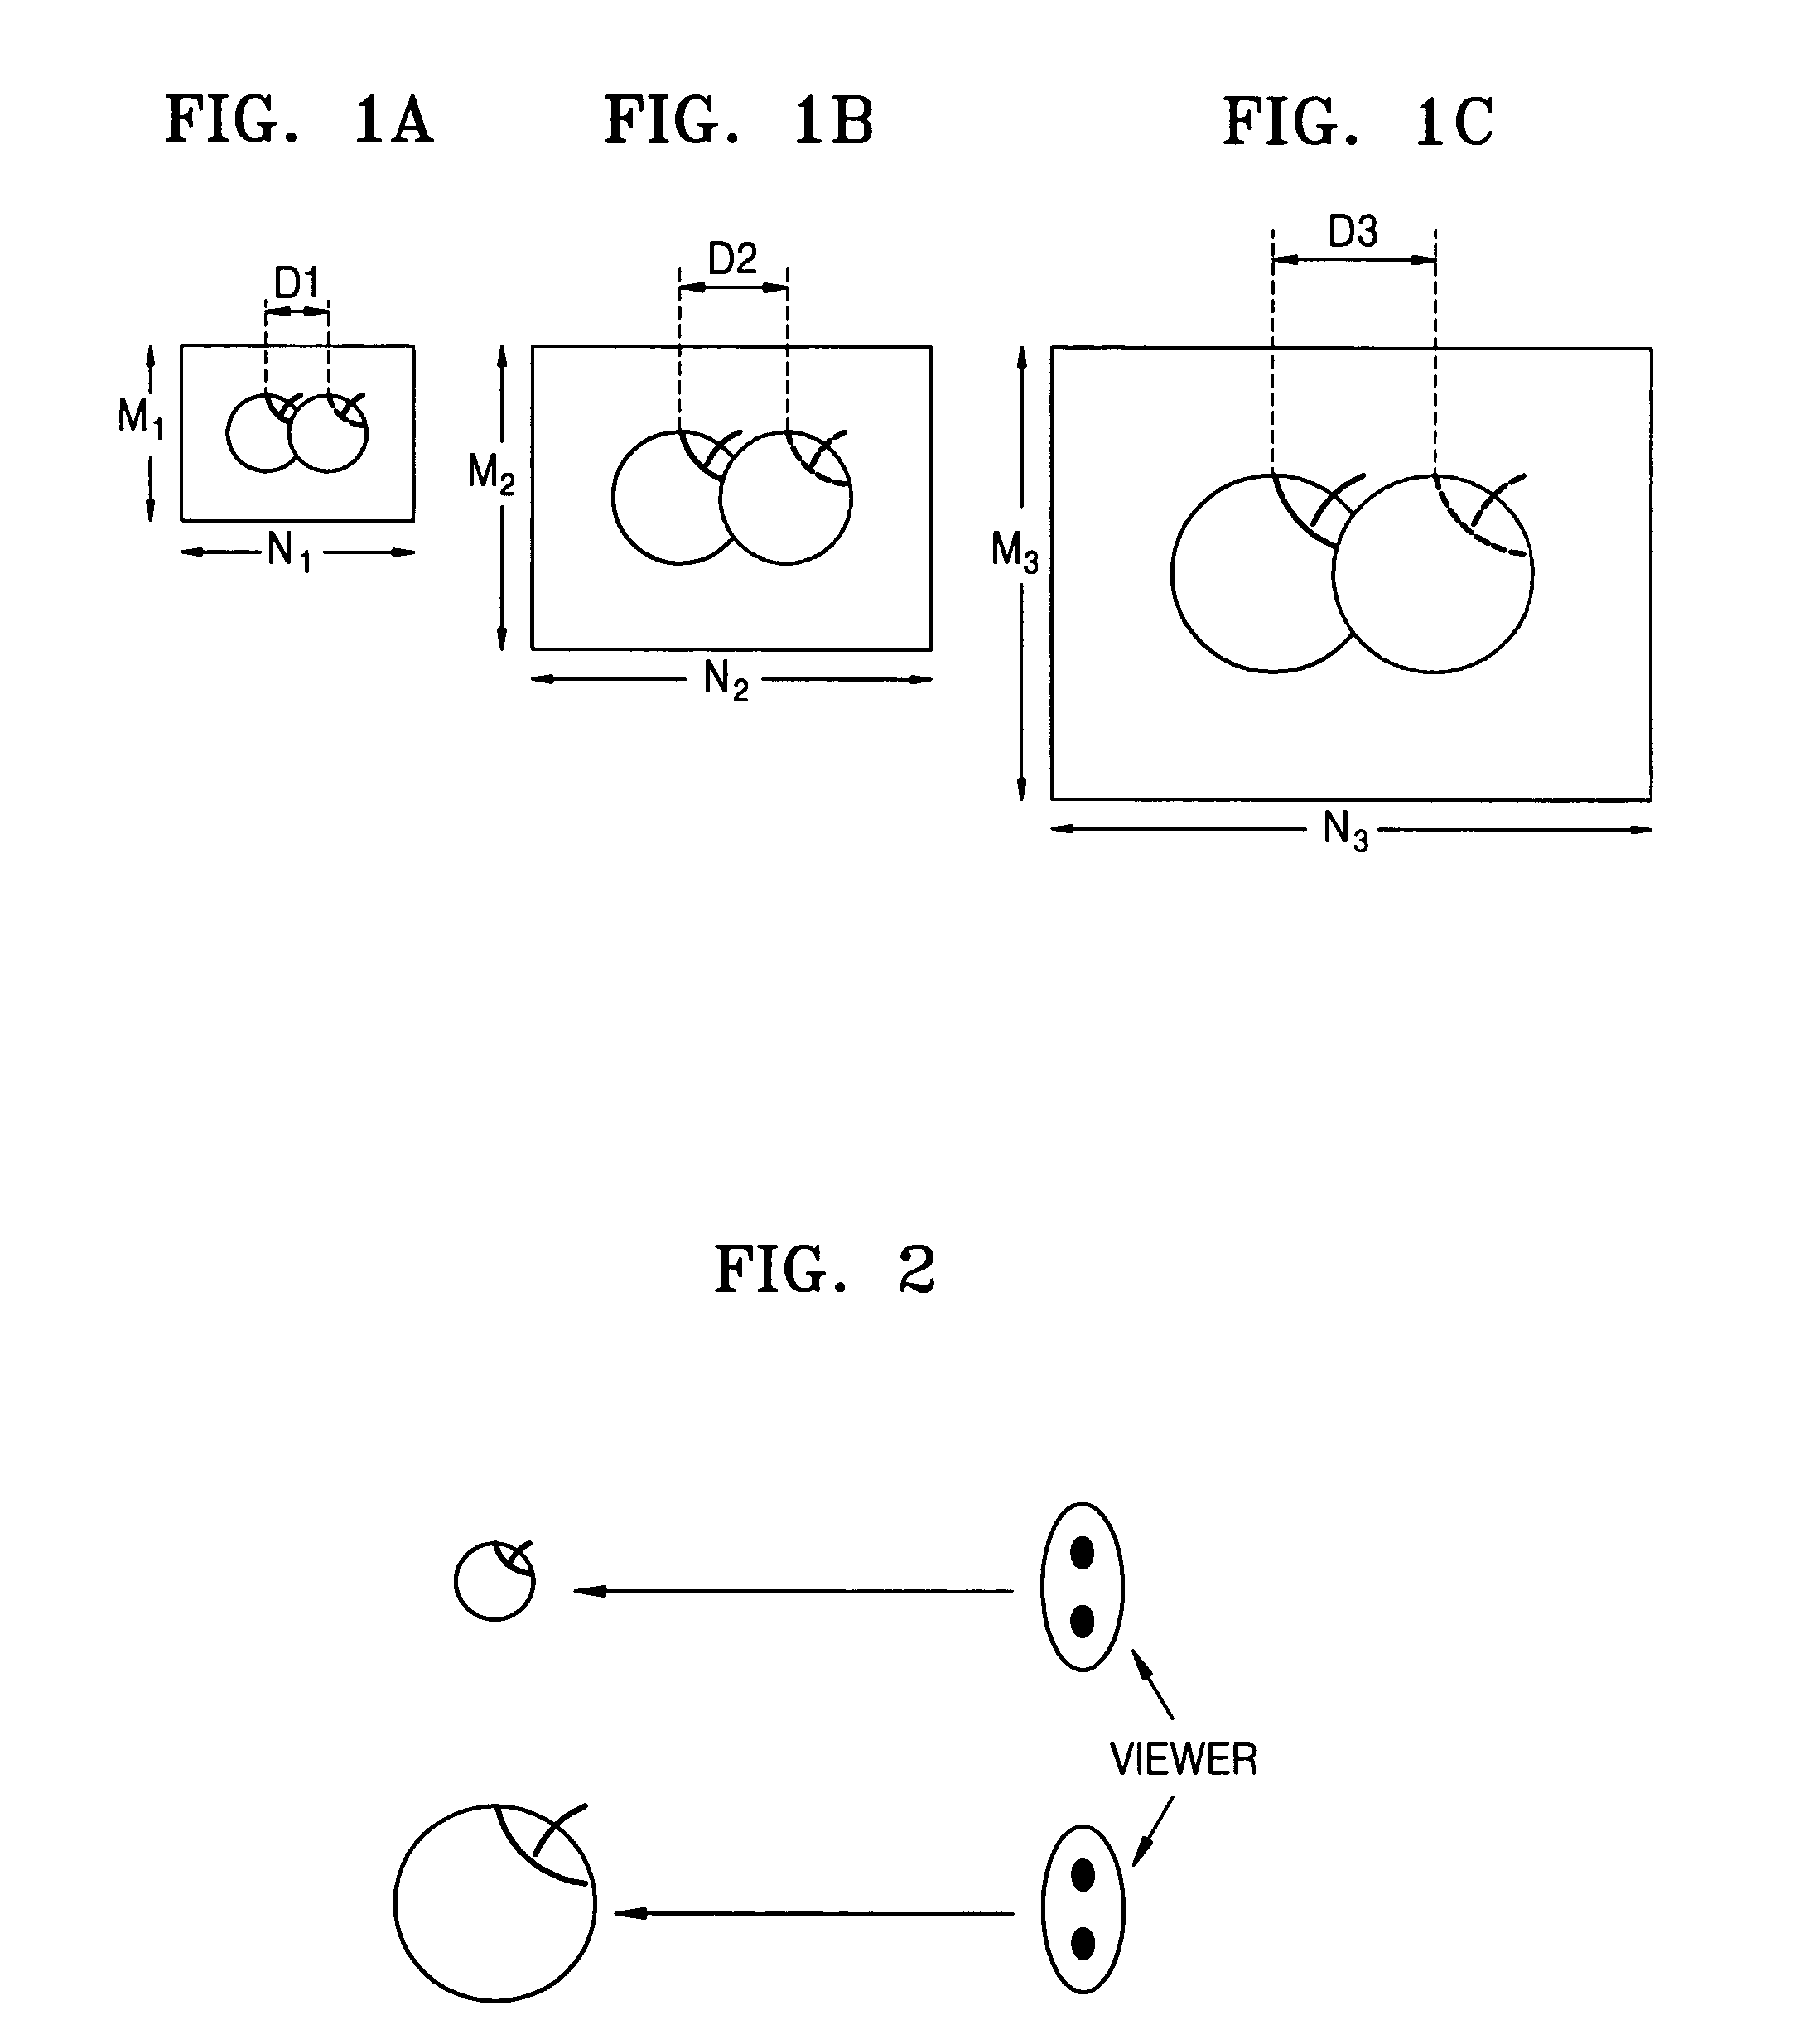 Apparatus and method for controlling depth of three-dimensional image